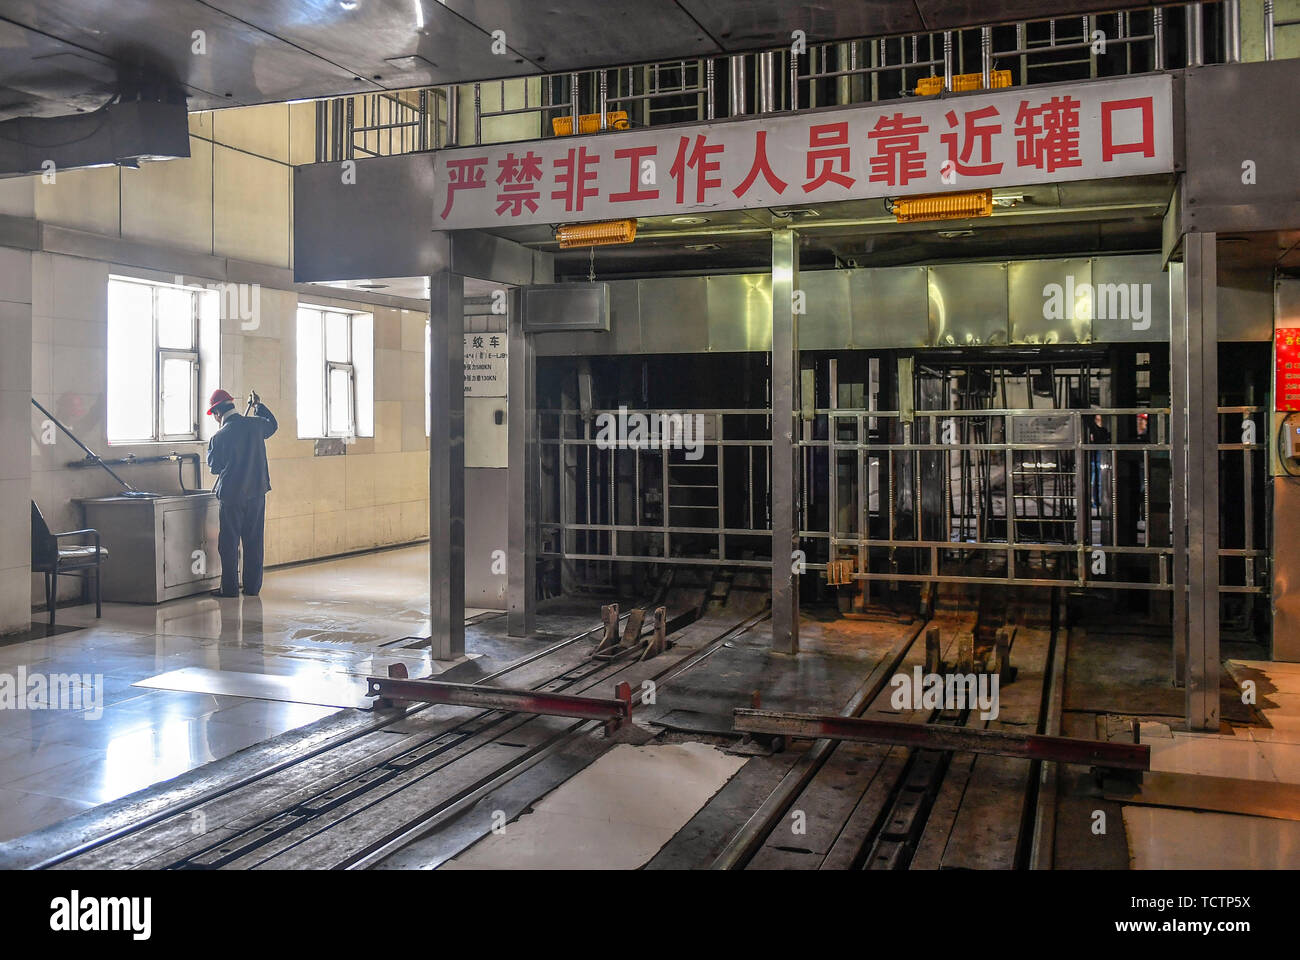 Changchun, China. 10th June, 2019. Photo taken on June 10, 2019 shows the coal mine's entrance at Longjiapu coal mining company in Changchun, northeast China. Nine people have been confirmed dead and 10 others injured following a rock burst late Sunday at a coal mine in Longjiapu, northeast China. The burst occured at around 8:00 p.m. at Longjiapu coal mining company and caused an earthquake measuring 2.3 on the Richter scale, according to local authorities. Credit: Xu Chang/Xinhua/Alamy Live News Stock Photo